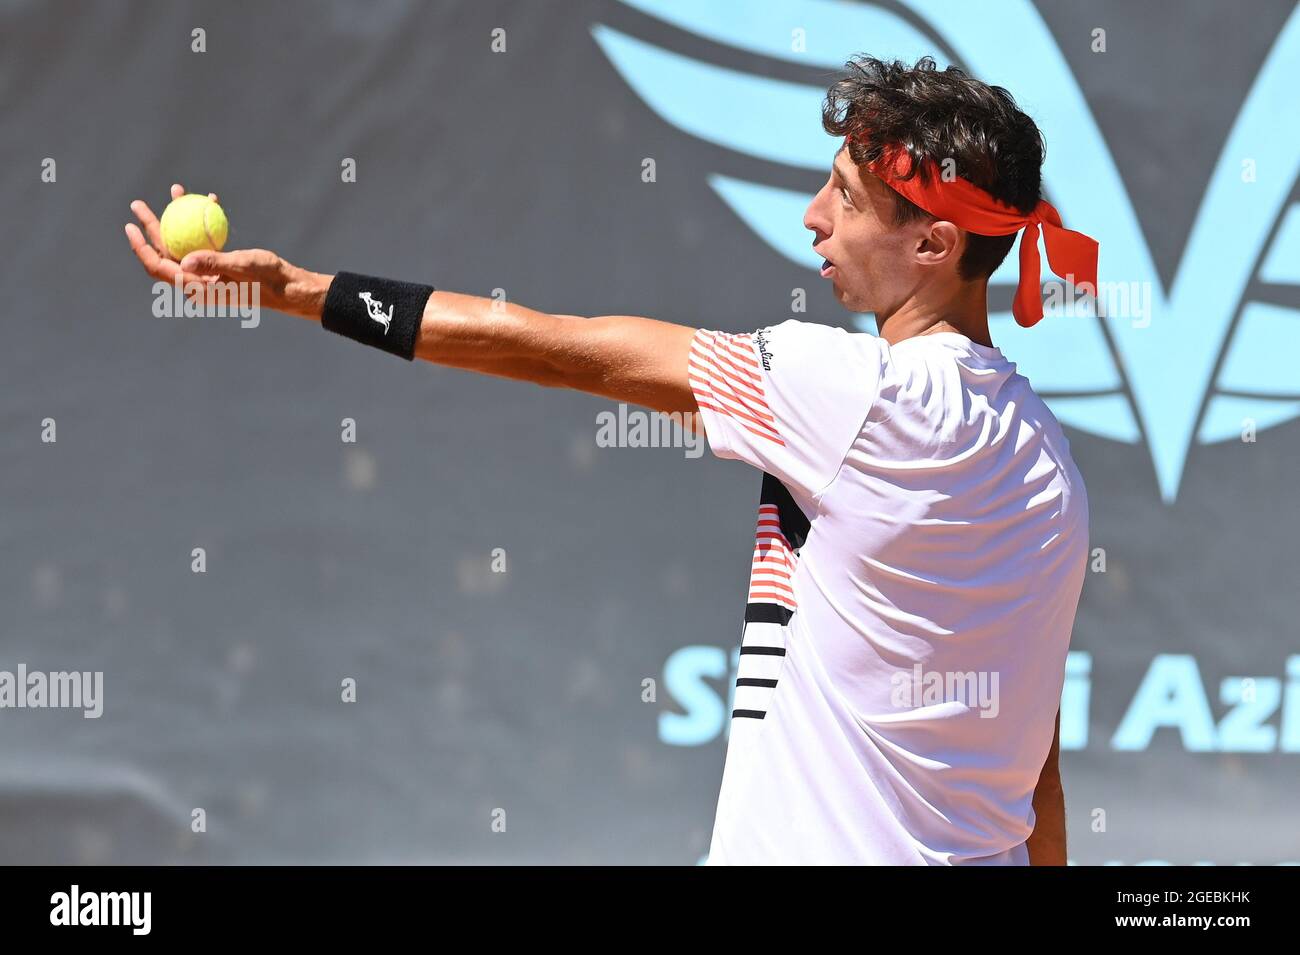 Verona, Italy. 18th Aug, 2021. Francesco Forti of Italy during ATP80  Challenger - Verona - Wednesday, Tennis Internationals in Verona, Italy,  August 18 2021 Credit: Independent Photo Agency/Alamy Live News Stock Photo  - Alamy